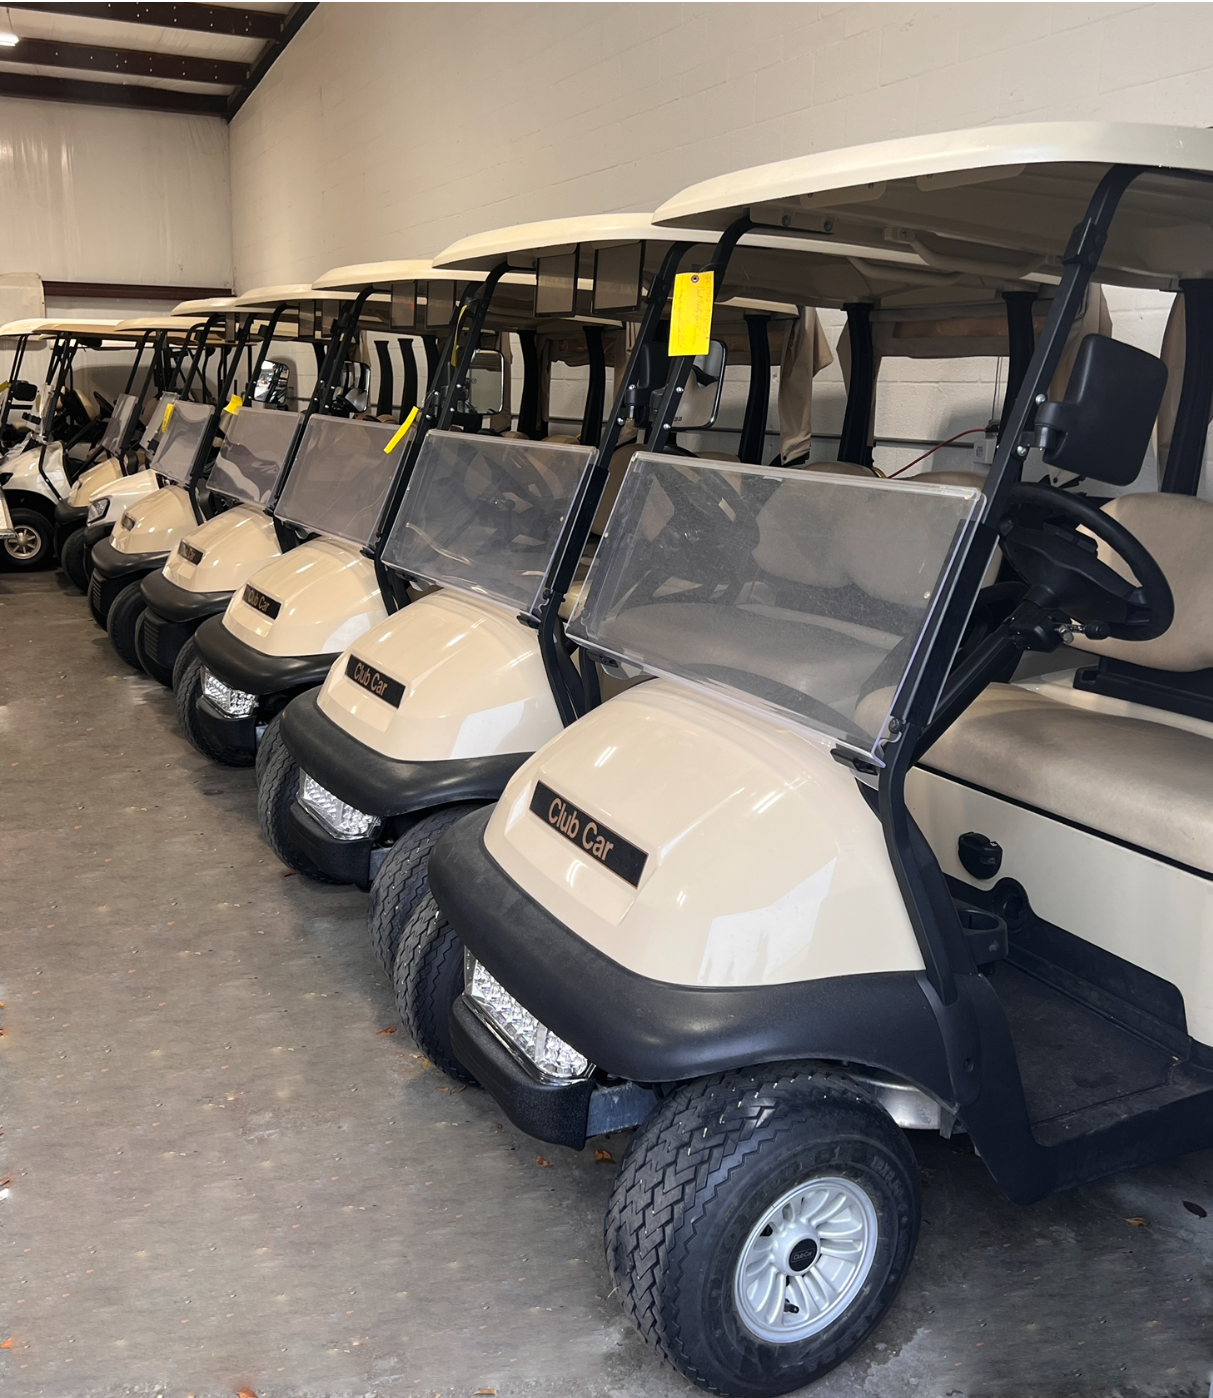 Beige Club Cars lined up  Cape Coral, FL Hole In One Golf Carts